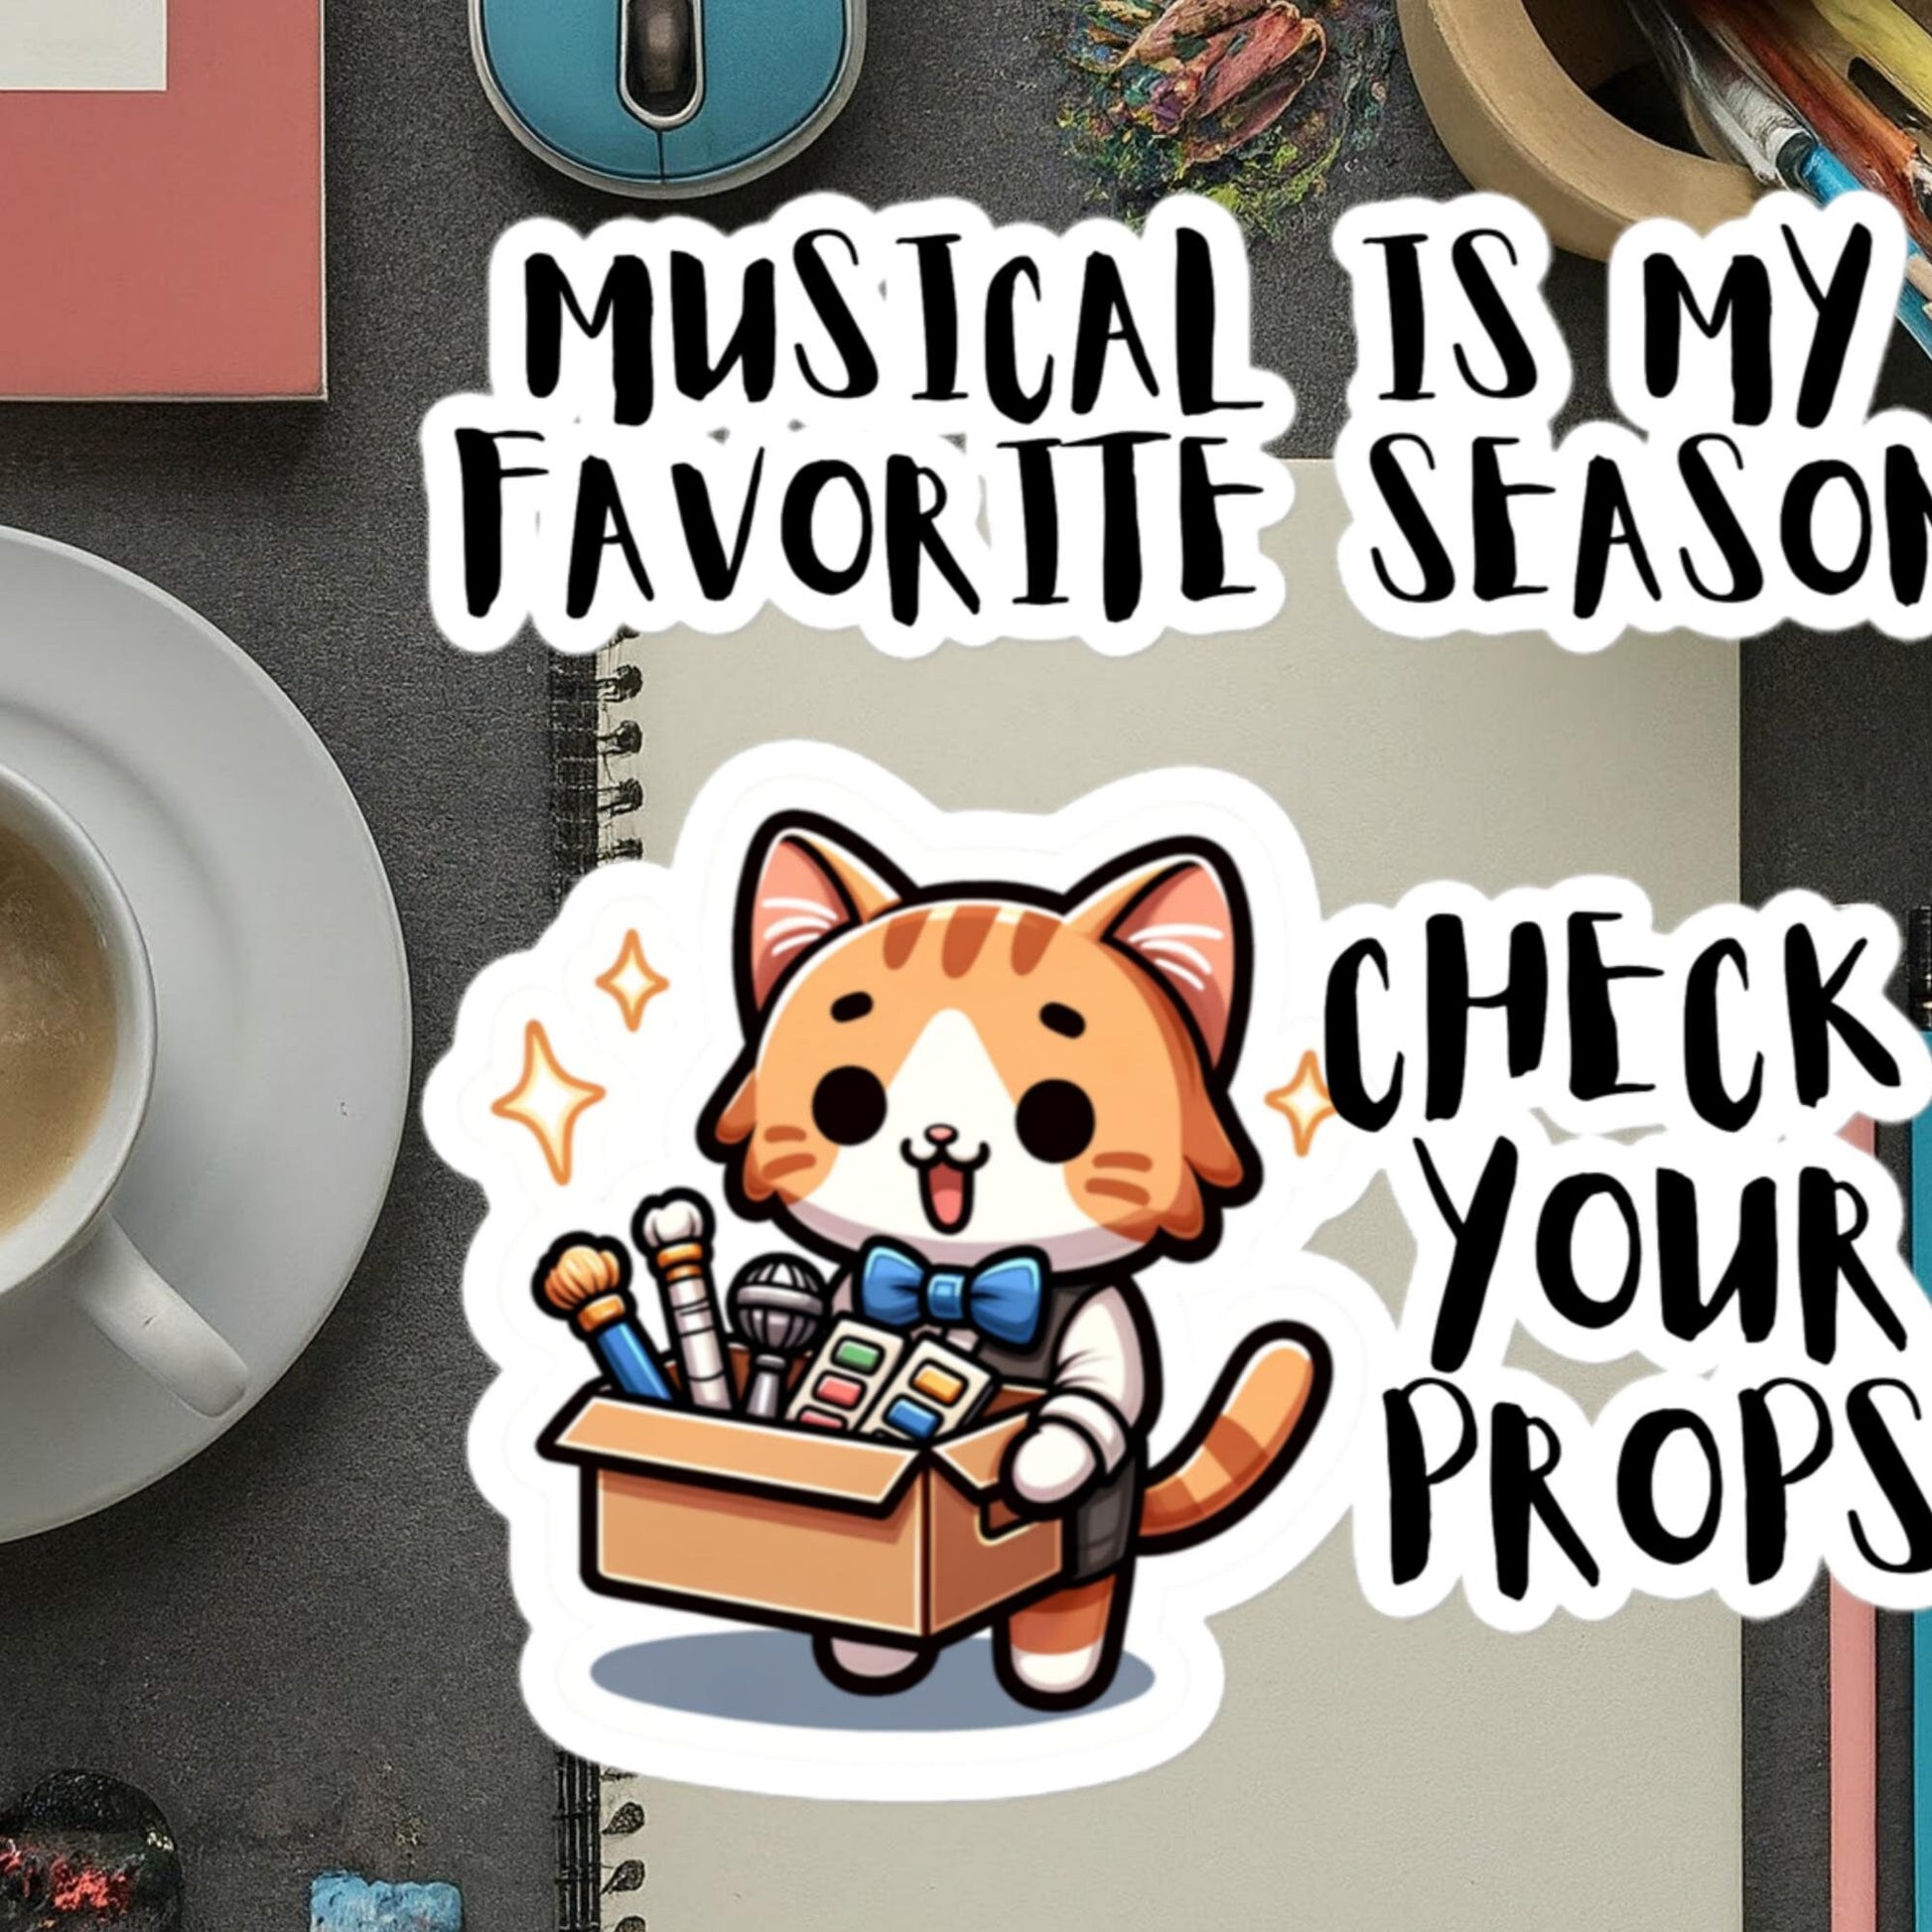 Check Your Props Theater Stickers Backstage crew stickers Musical is my favorite seasonBubble-free stickers